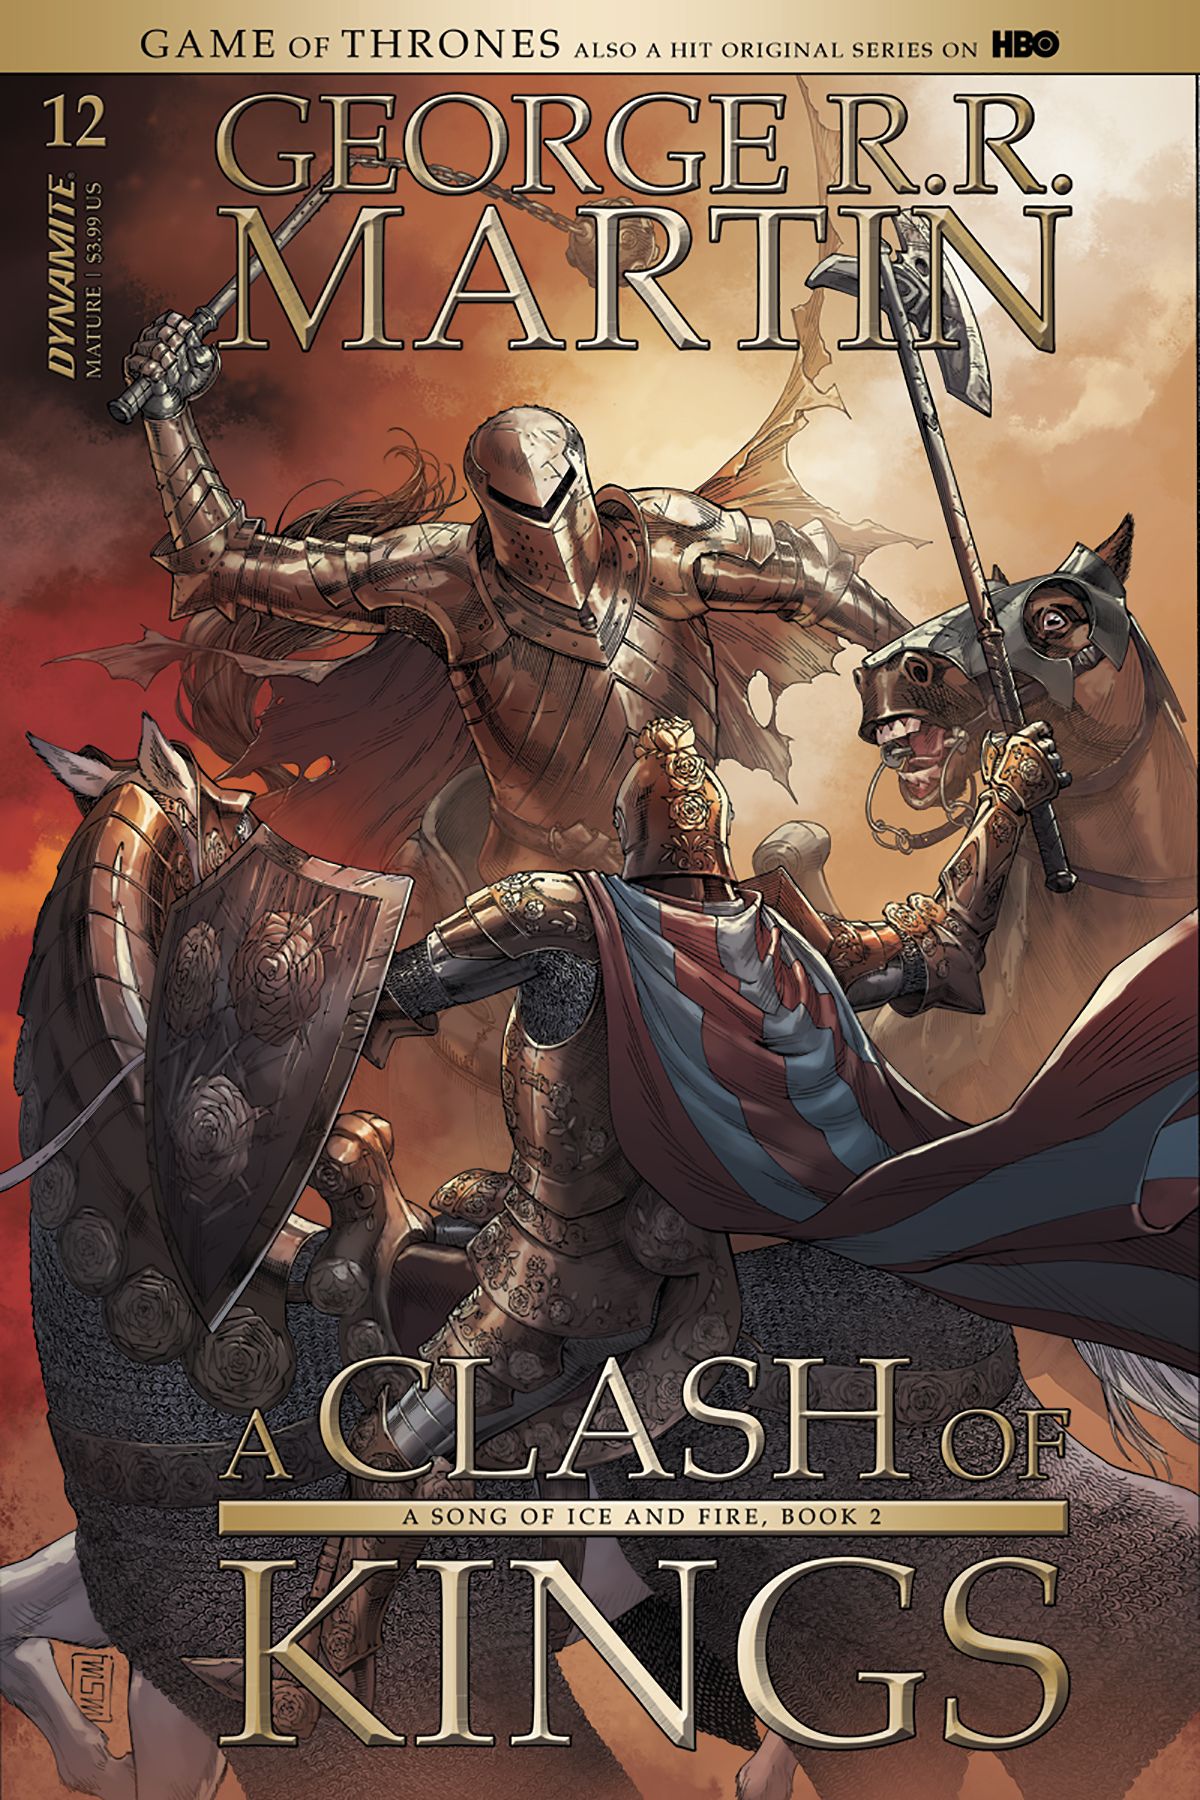 Game of Thrones: A Clash of Kings #12 Comic